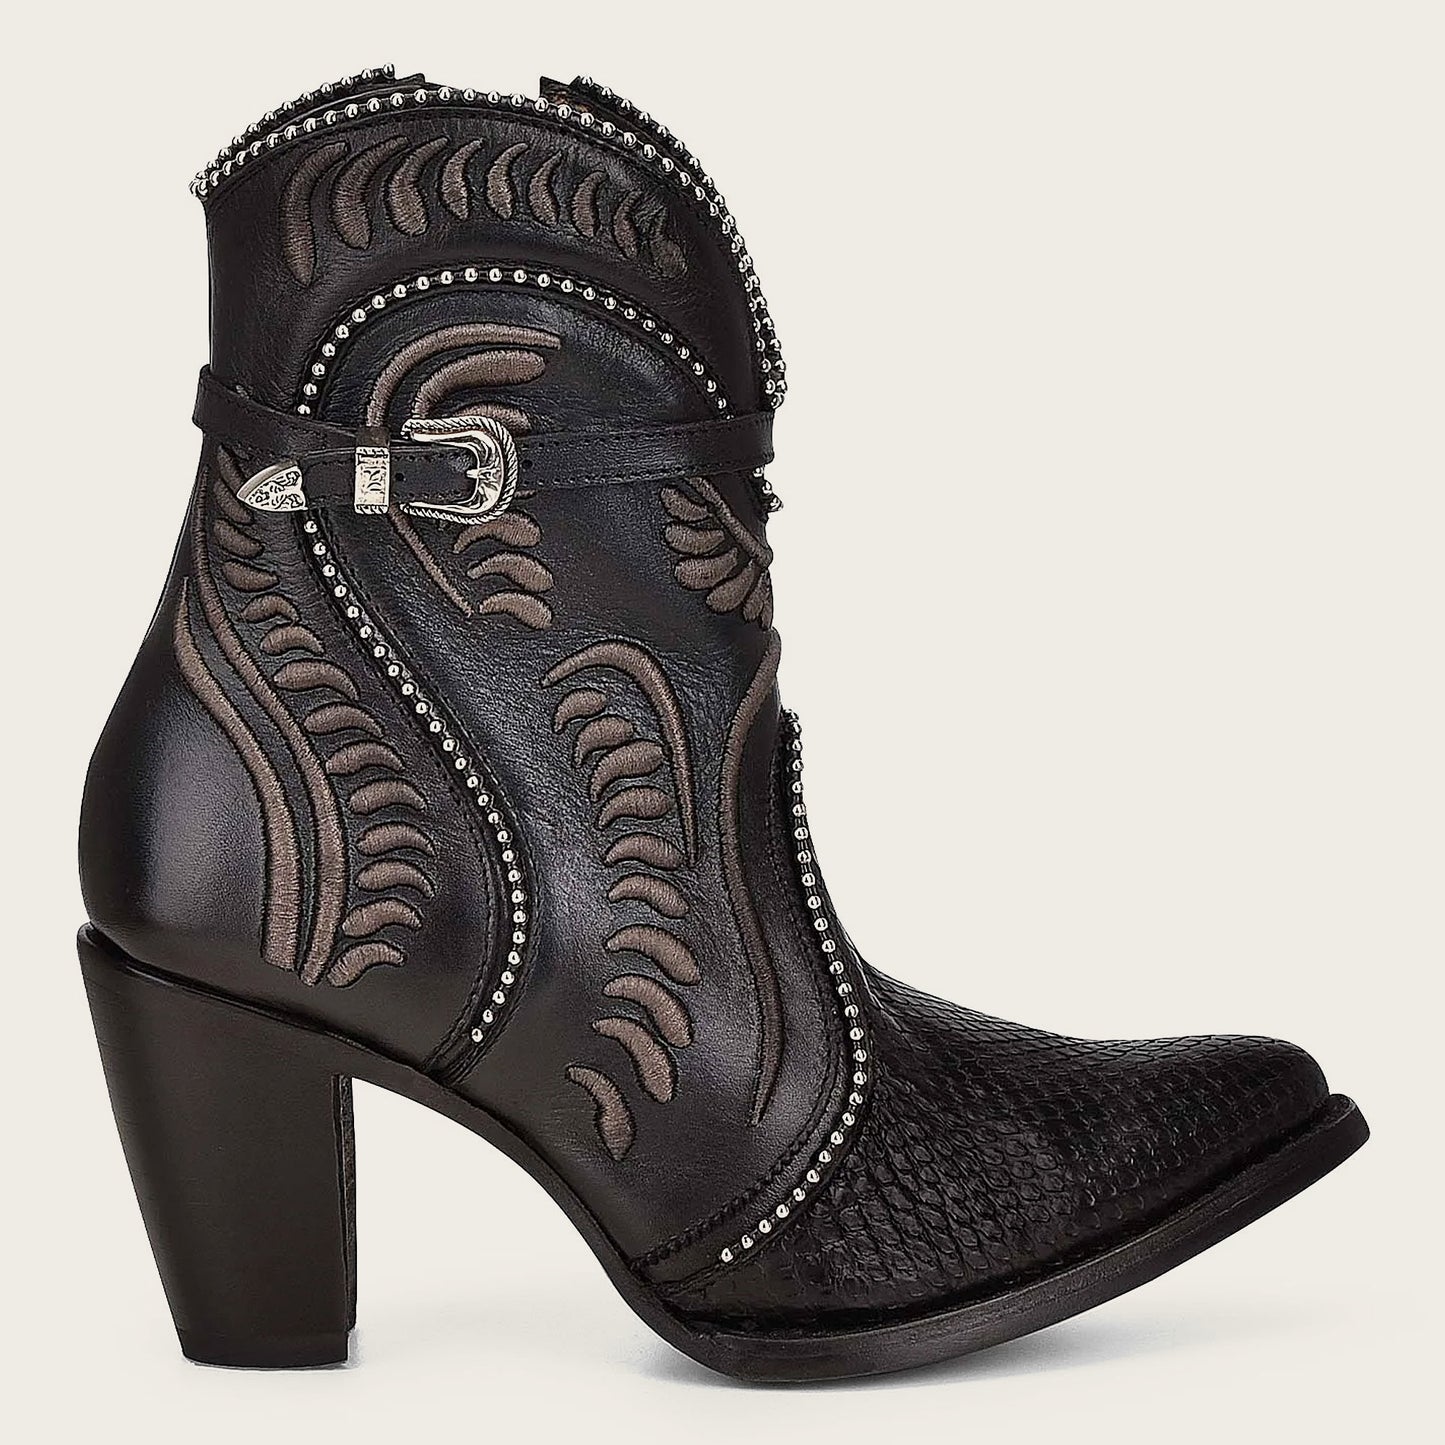 Add a touch of sophistication to your footwear collection with these Genuine python embroidered black leather bootie